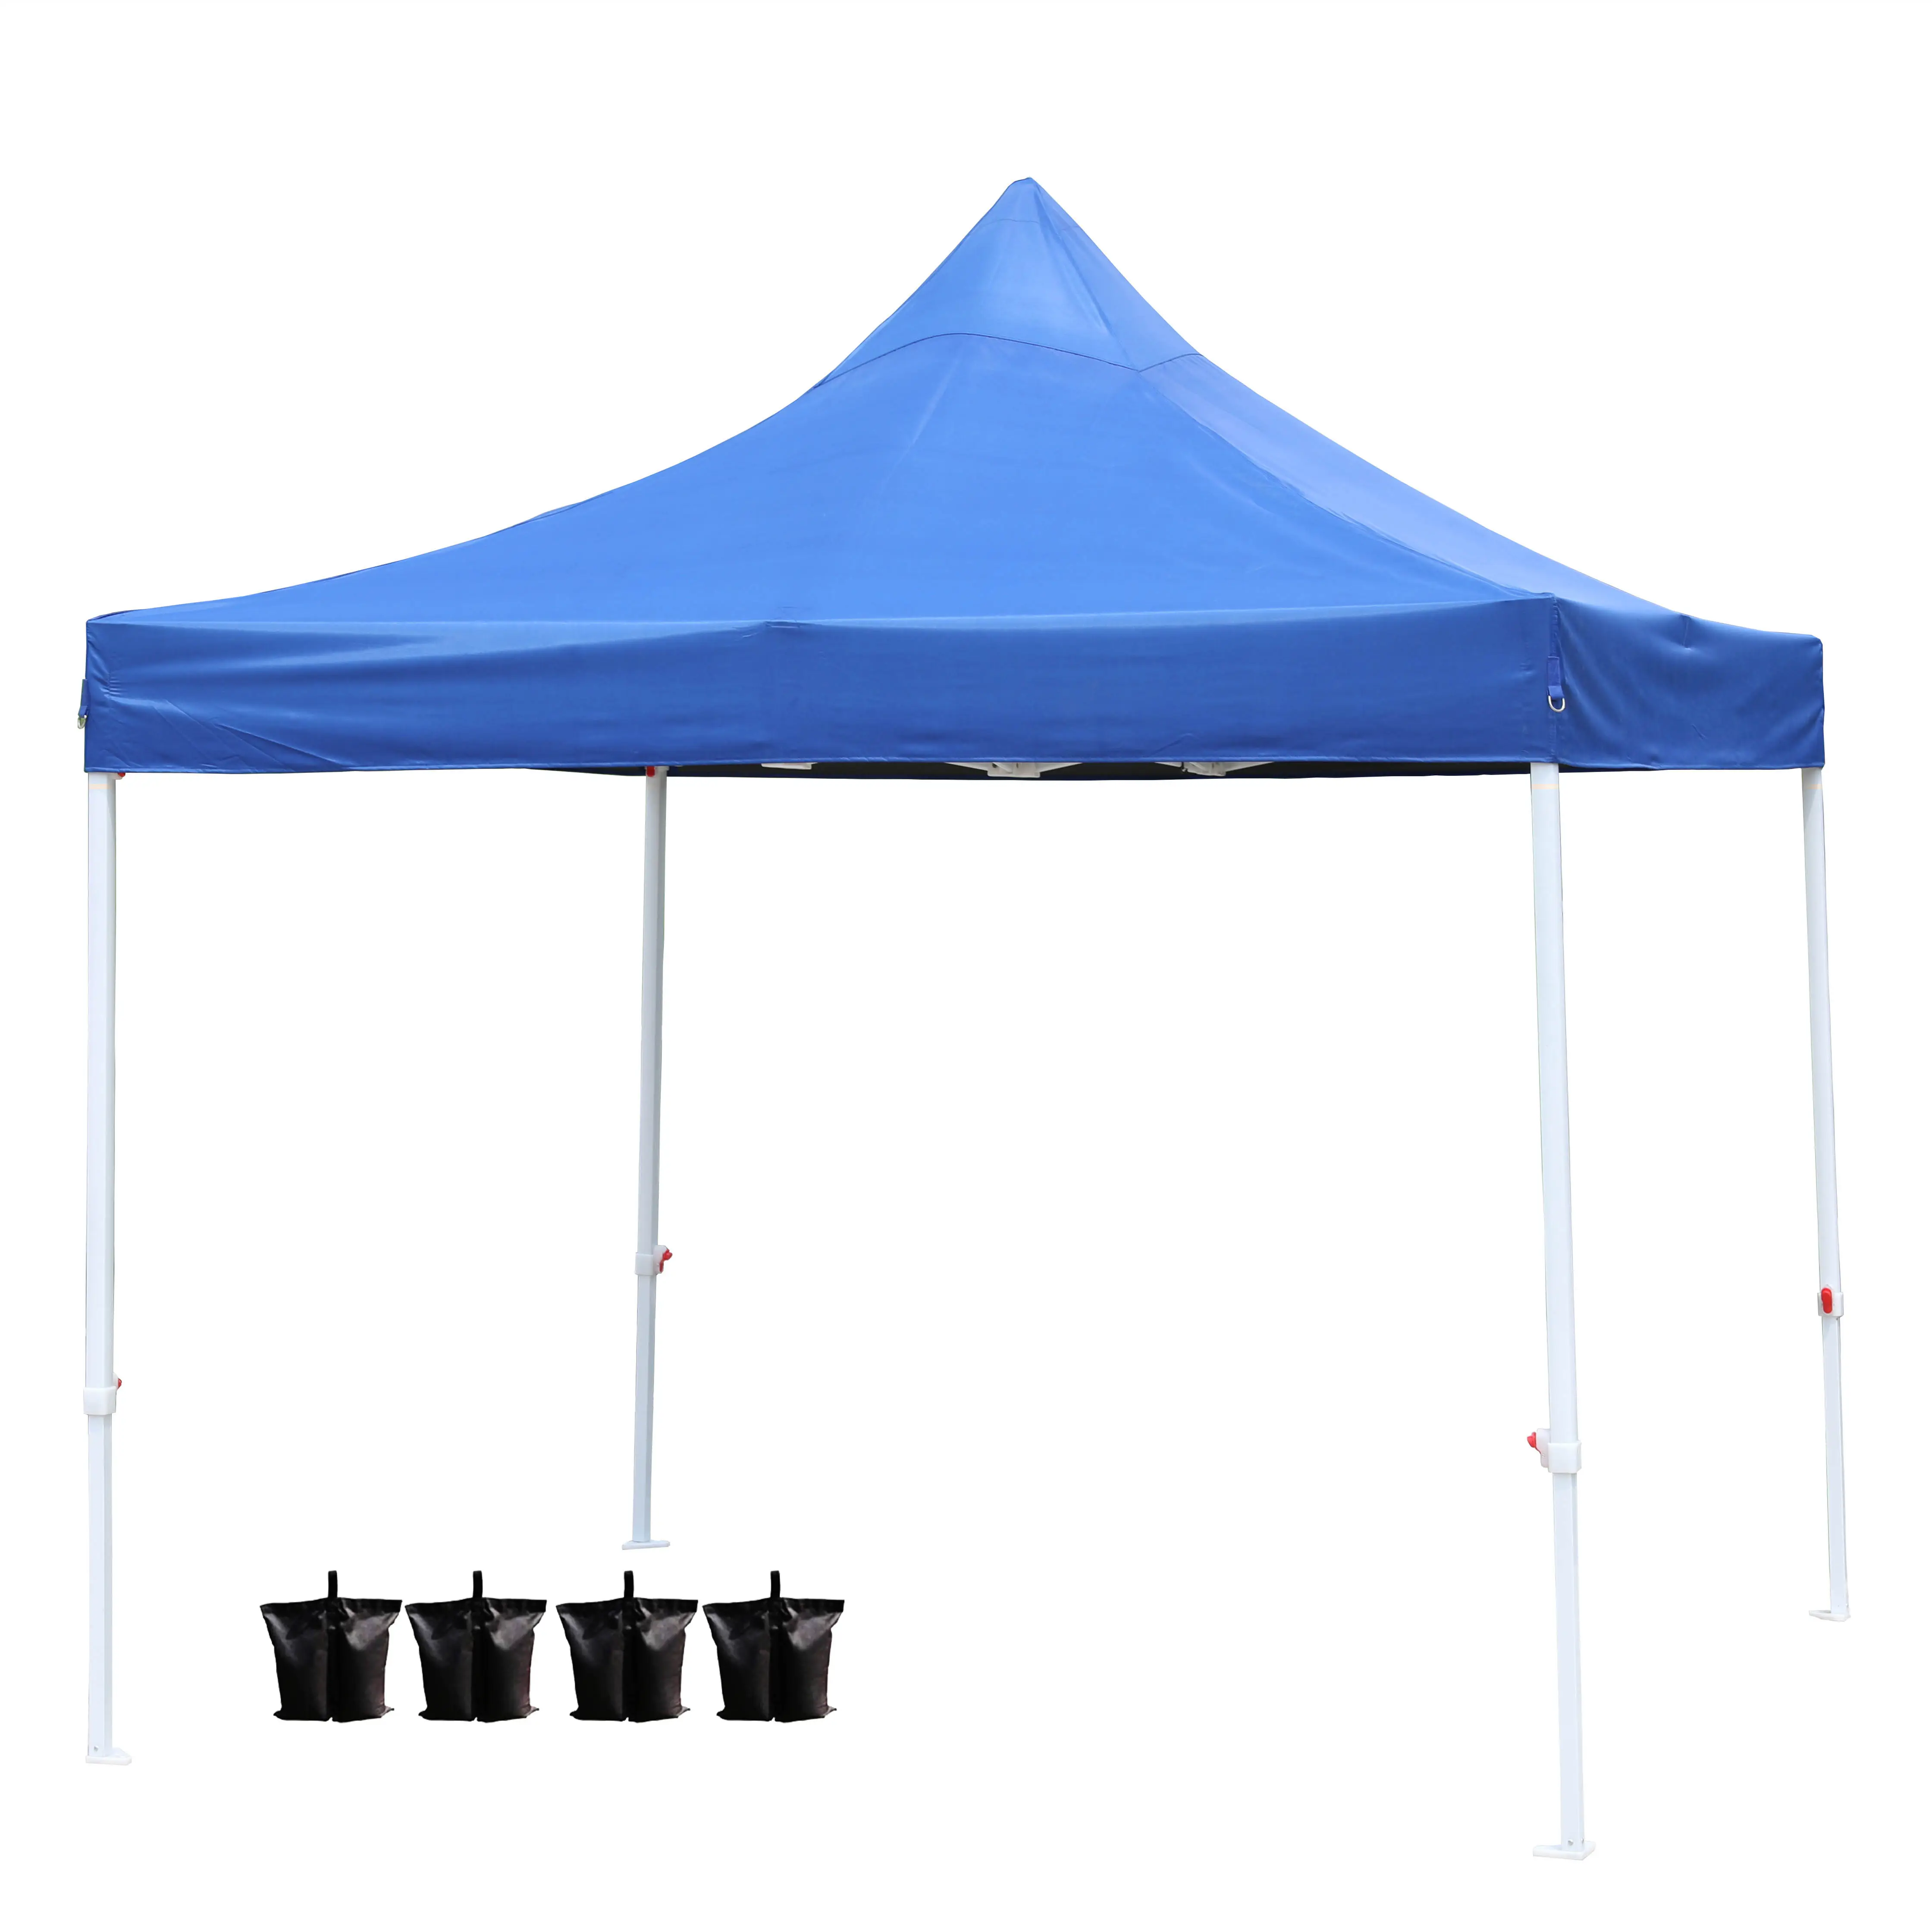 PIXING sales online canopy tent 10x10 tents for party event commercial advertising festival